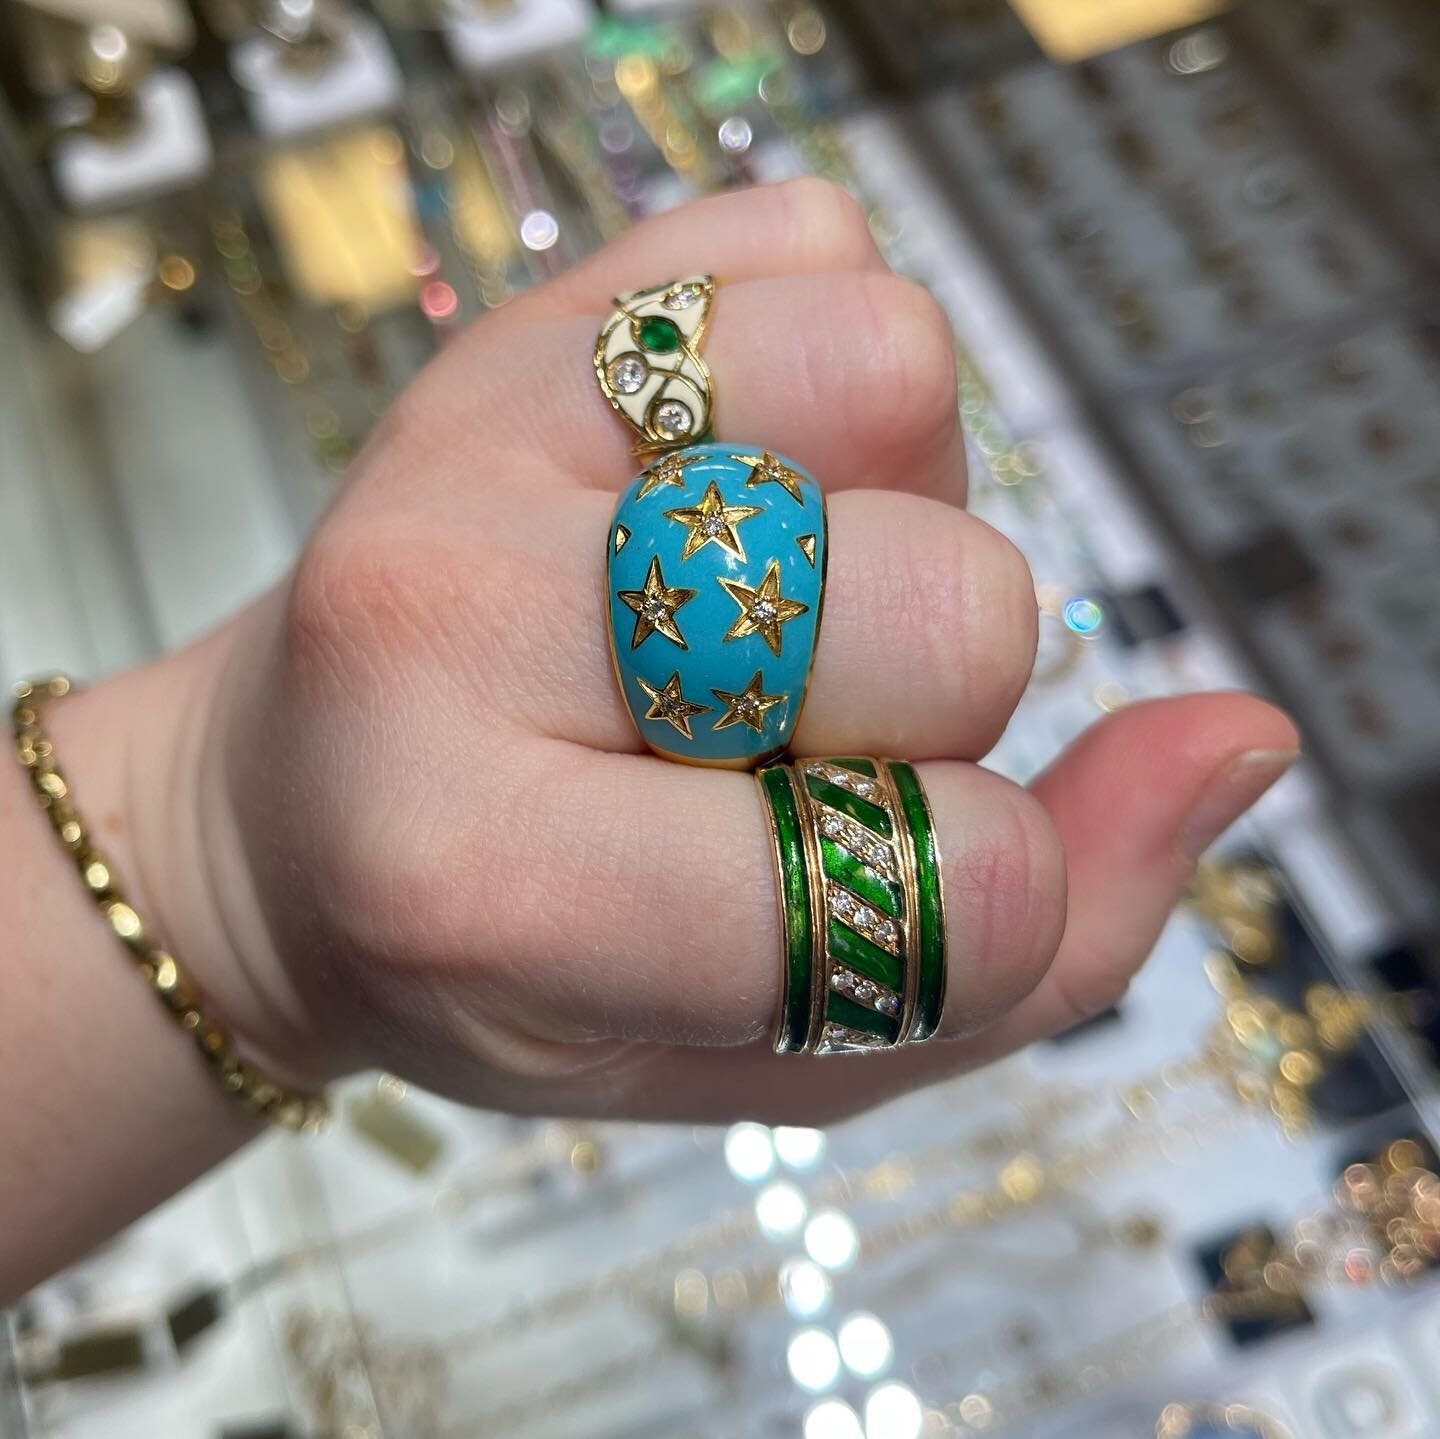 Stars and Stripes! 💫 Three enamel rings featuring a sprinkle of diamonds and emeralds. The center ring is my favorite, which one is yours? ⭐️ 

#celestialjewelry #vintage #vintagejewelry #oneofakindjewelry #enamel #uniquejewelry #stack #jewels #smal